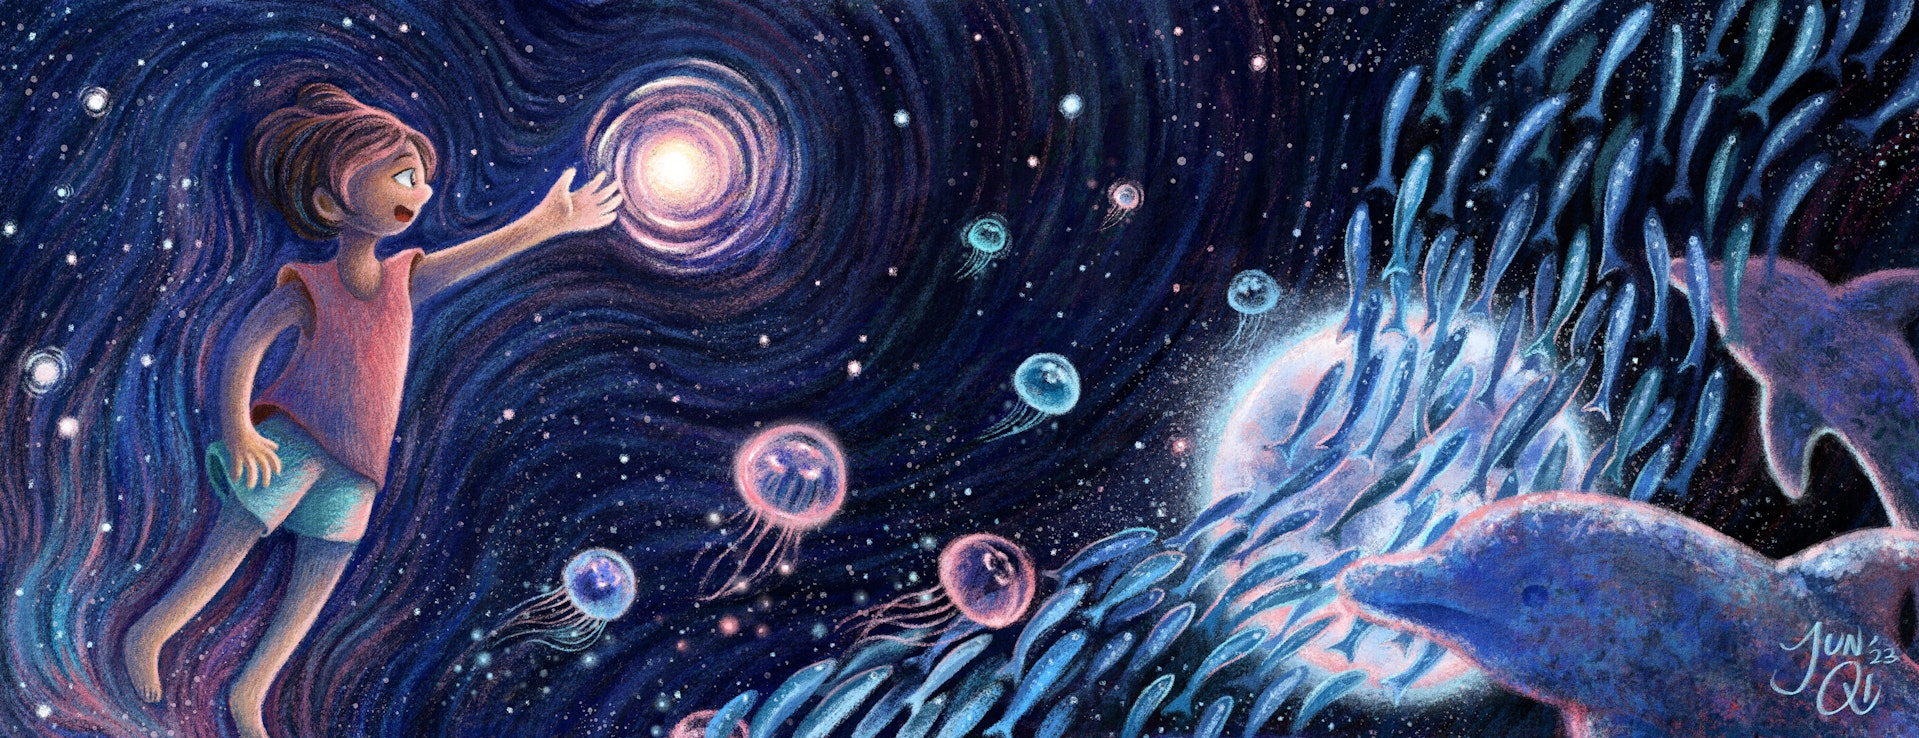 Illustration of a girl floating in spacesea, reaching out to a glowing orb/star. A silvery shoal of fish swim past a full moon as well as some dolphins. There are shooting stars and nebulae in the distance.